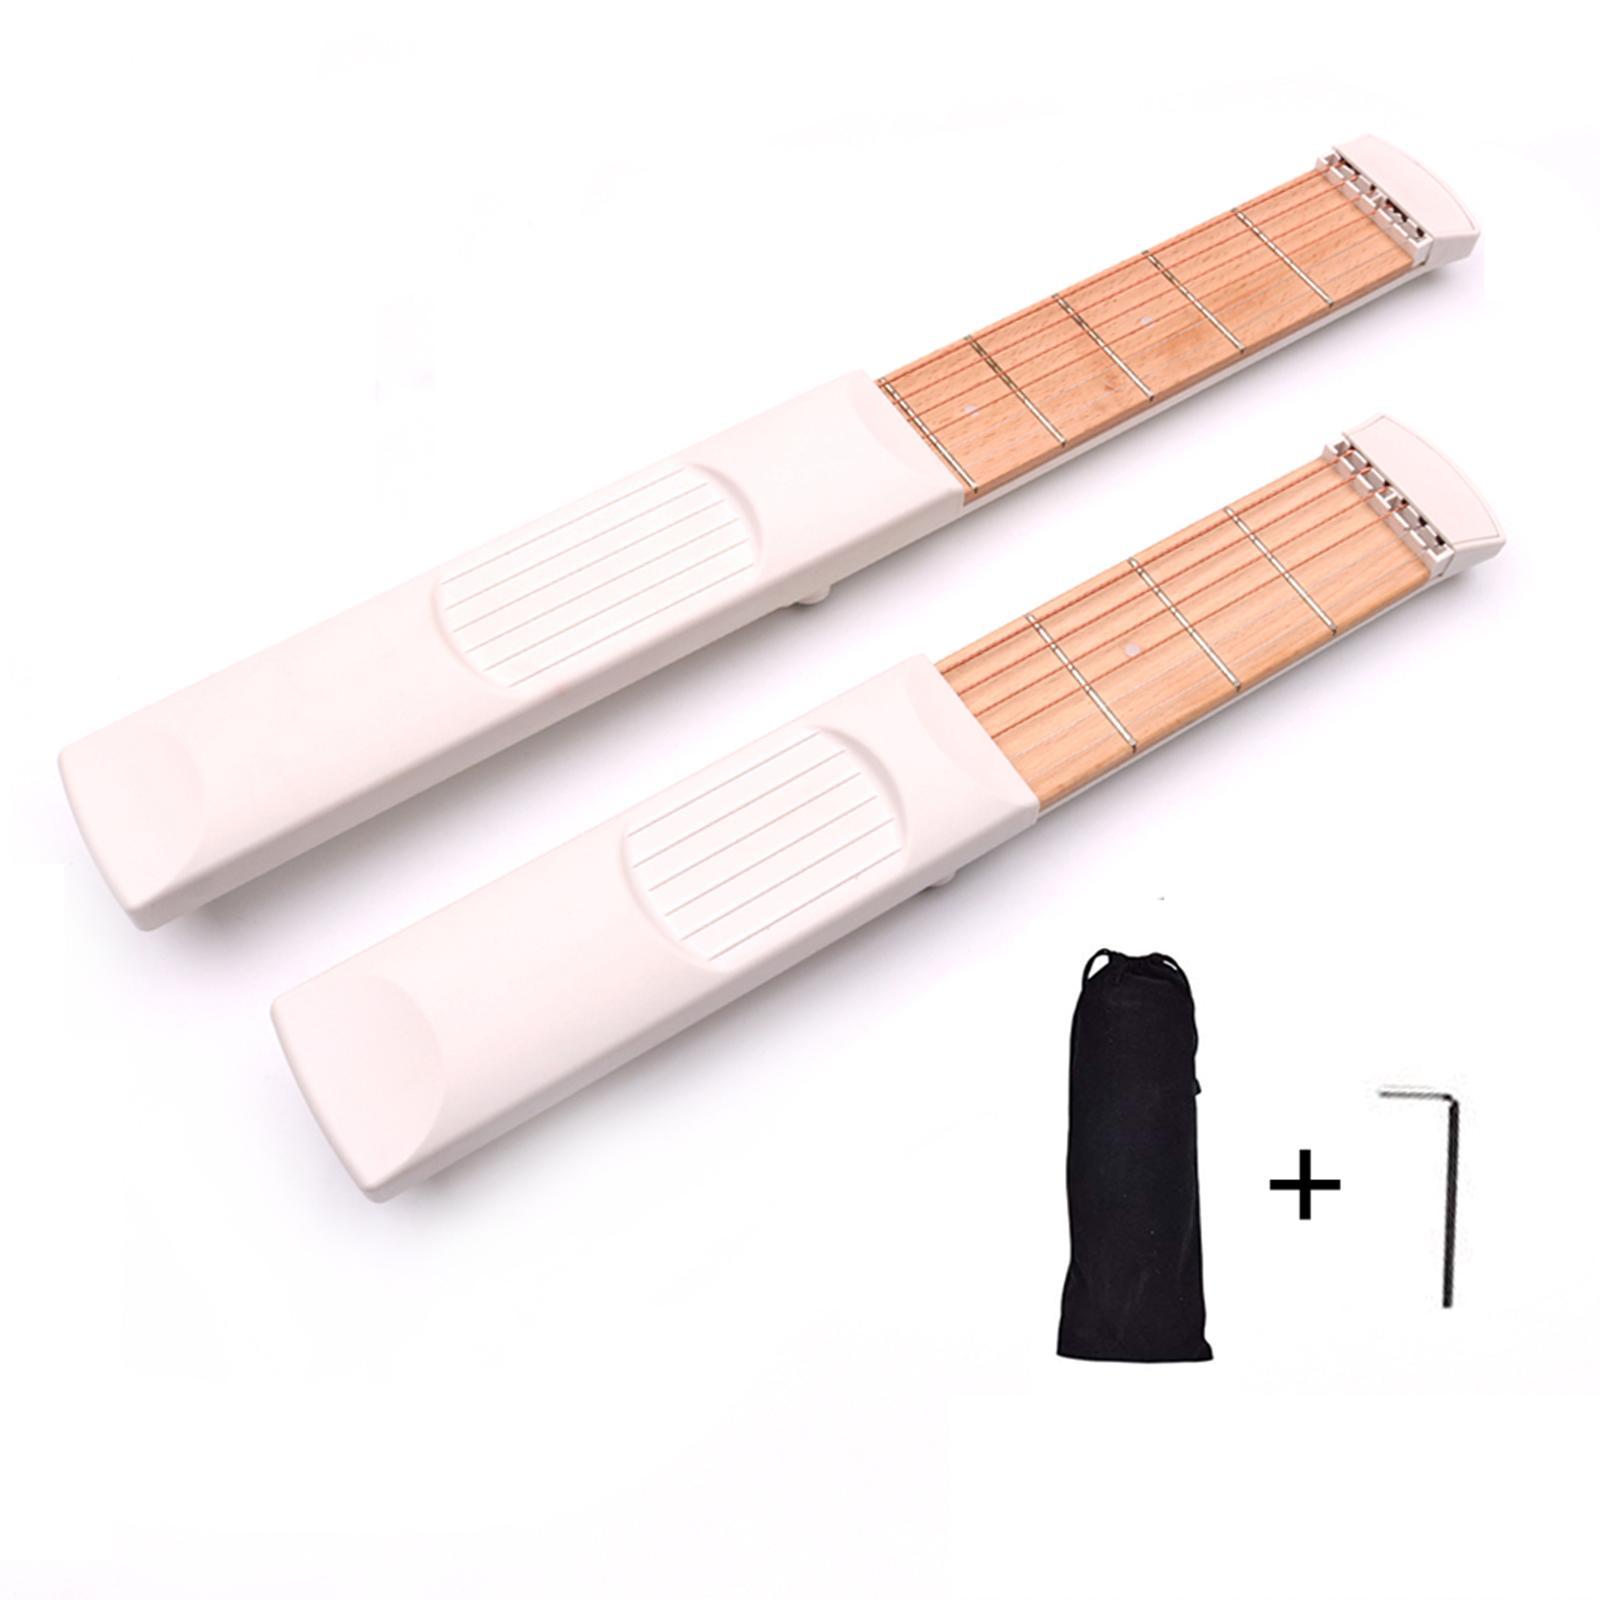 4 Fret 6 Fret Pocket Guitar Chords Trainer Left Hand with Storage Bag and Wrench for Beginner